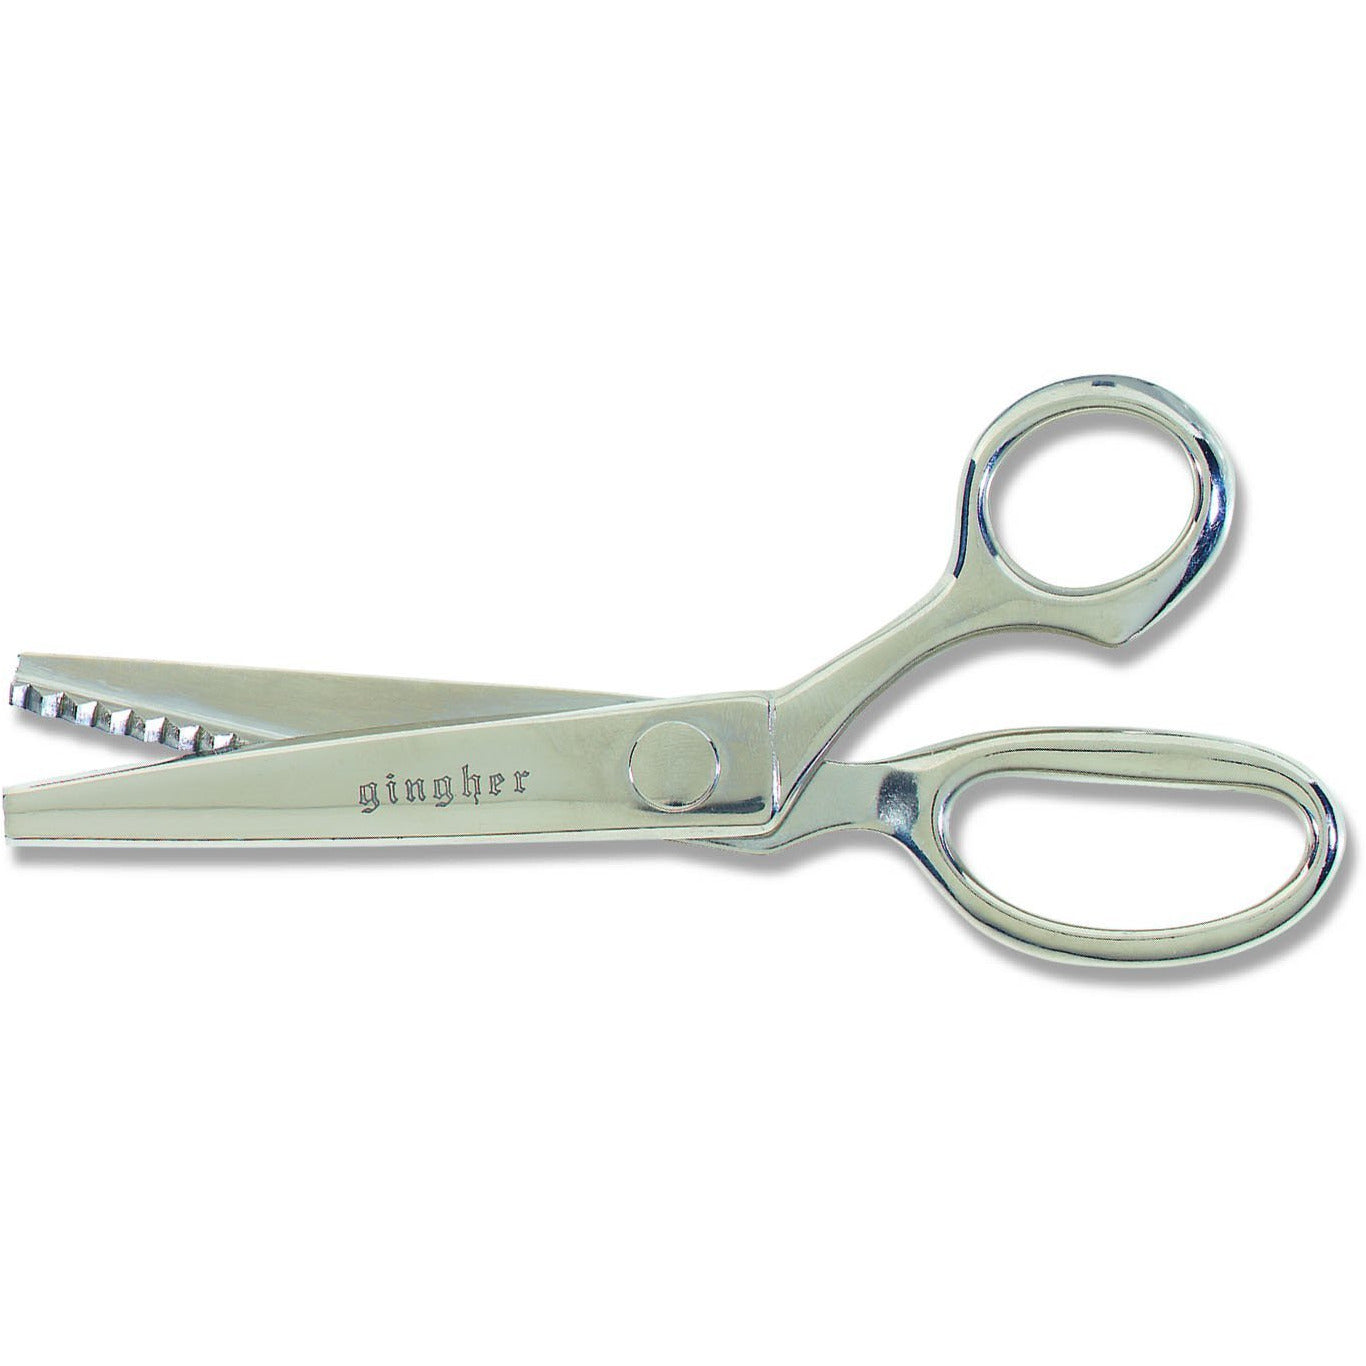 Gingher Scissors and Shears - United States Sales